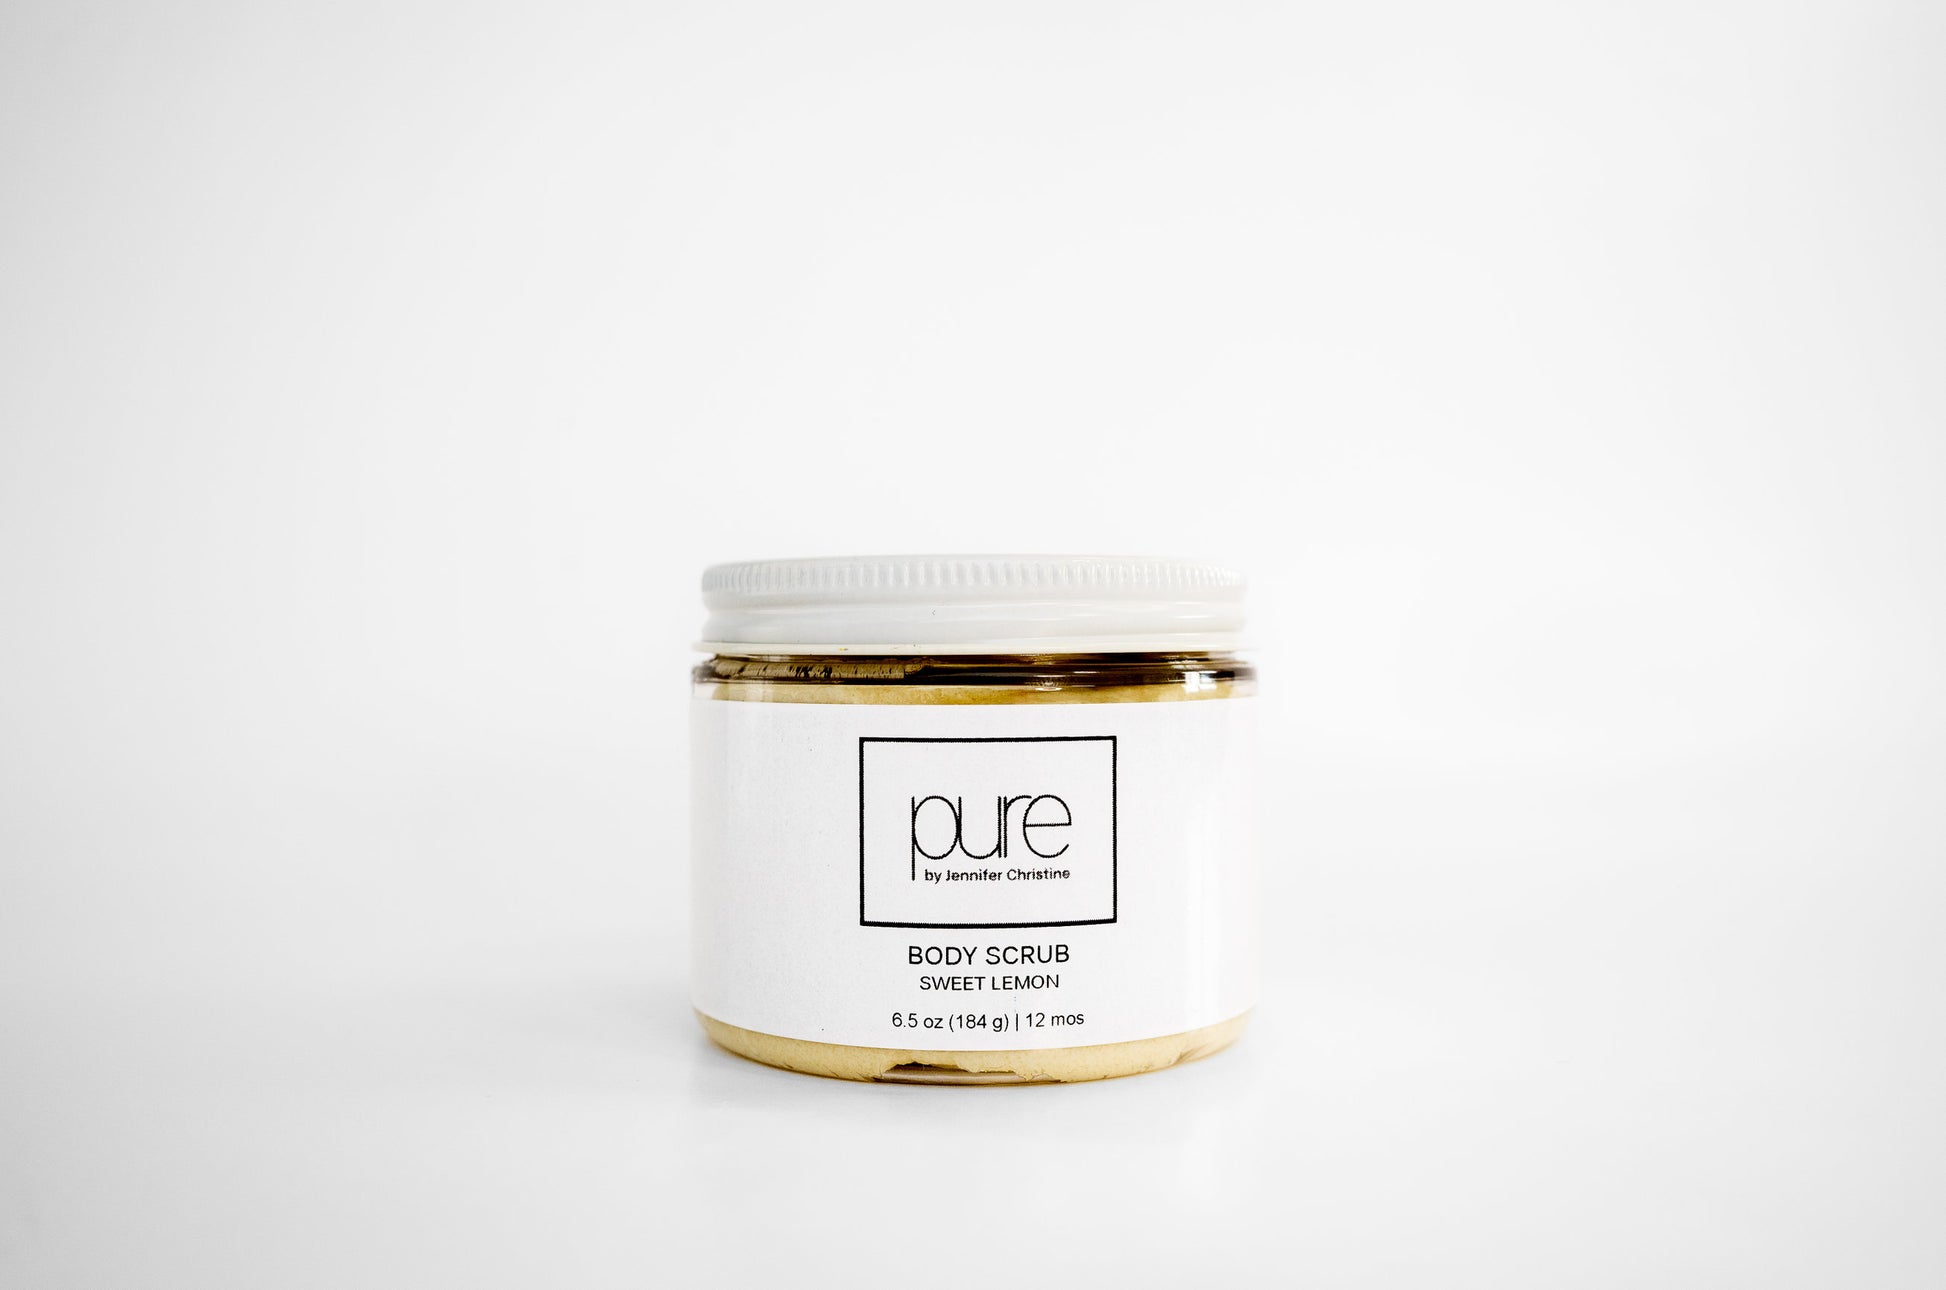 Our natural, plant-based Body Scrubs exfoliate and cleanse rough dry skin while also bringing hydration to it with its star ingredients, Shea Butter, Coconut Oil and Honey.